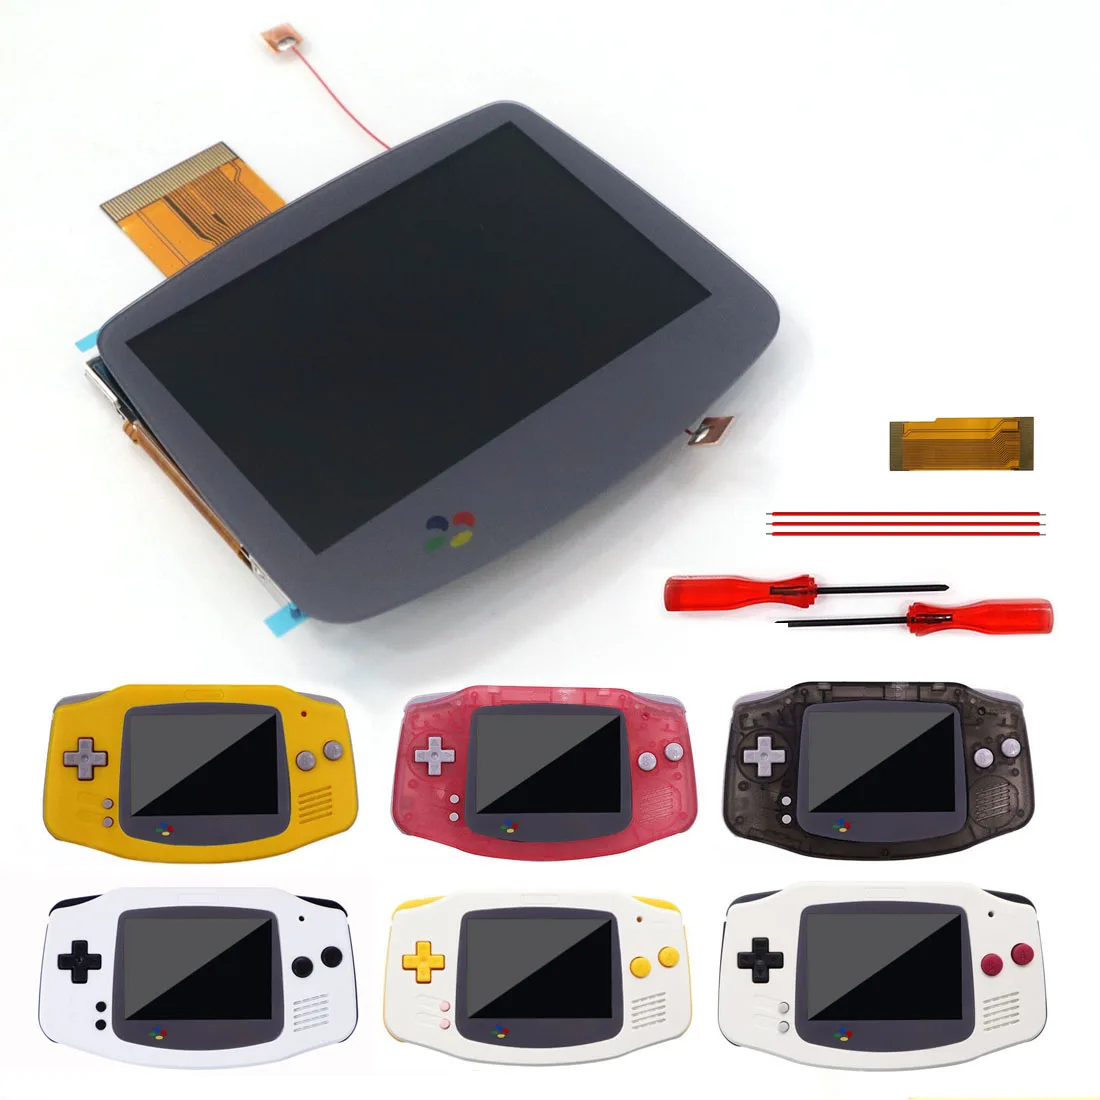 

Gray Lens V5 Laminated Drop In 3.0" IPS 720X480 Backlight Retro Pixel LCD KIT For Game Boy Advance GBA With Housing Shell